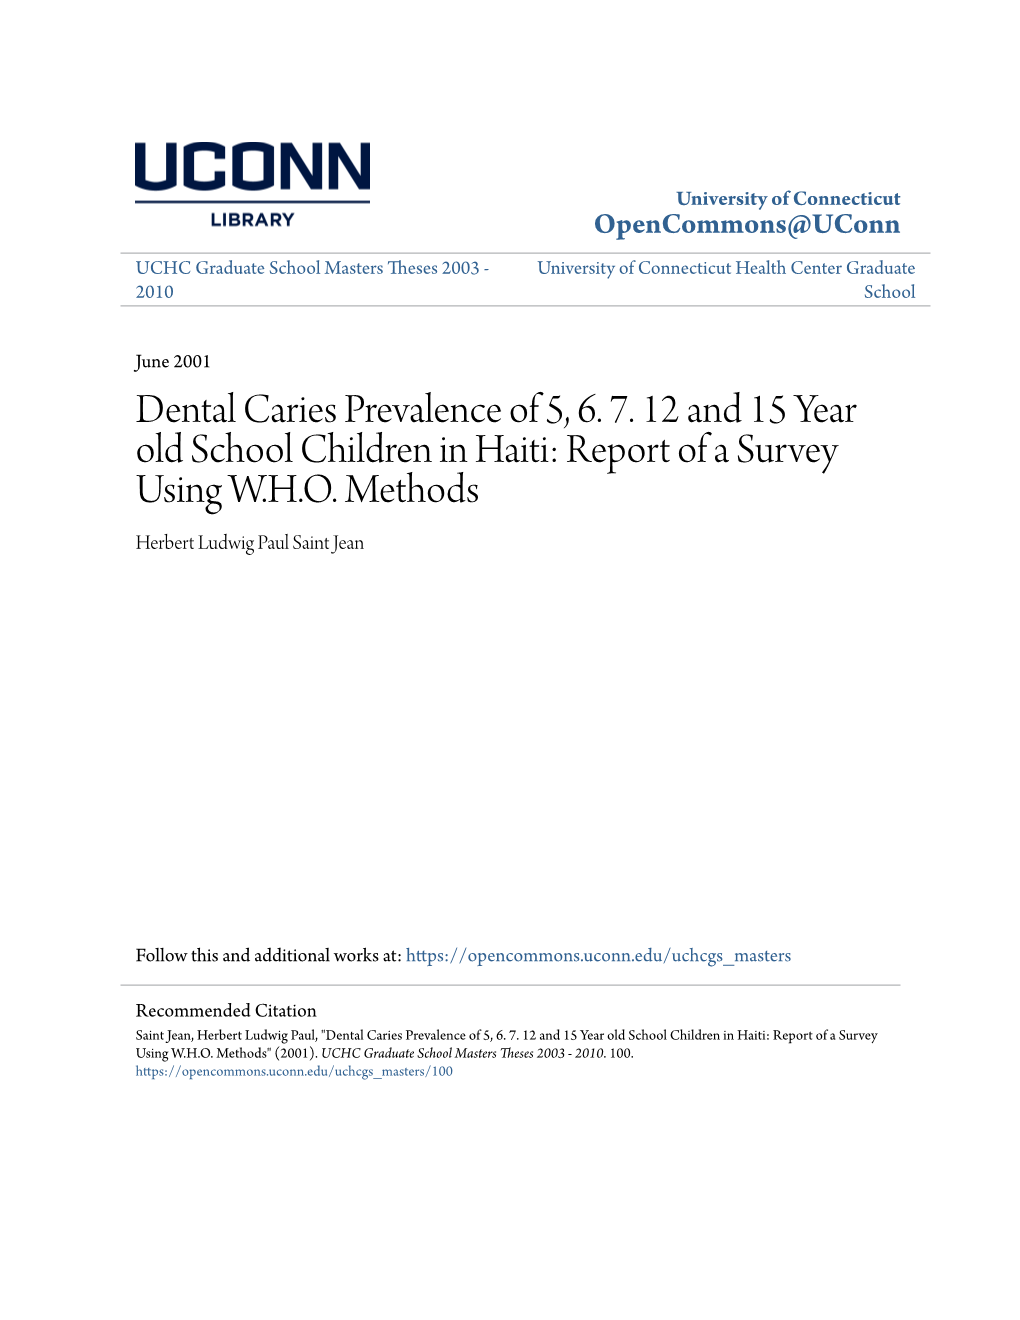 Dental Caries Prevalence of 5, 6. 7. 12 and 15 Year Old School Children in Haiti: Report of a Survey Using W.H.O